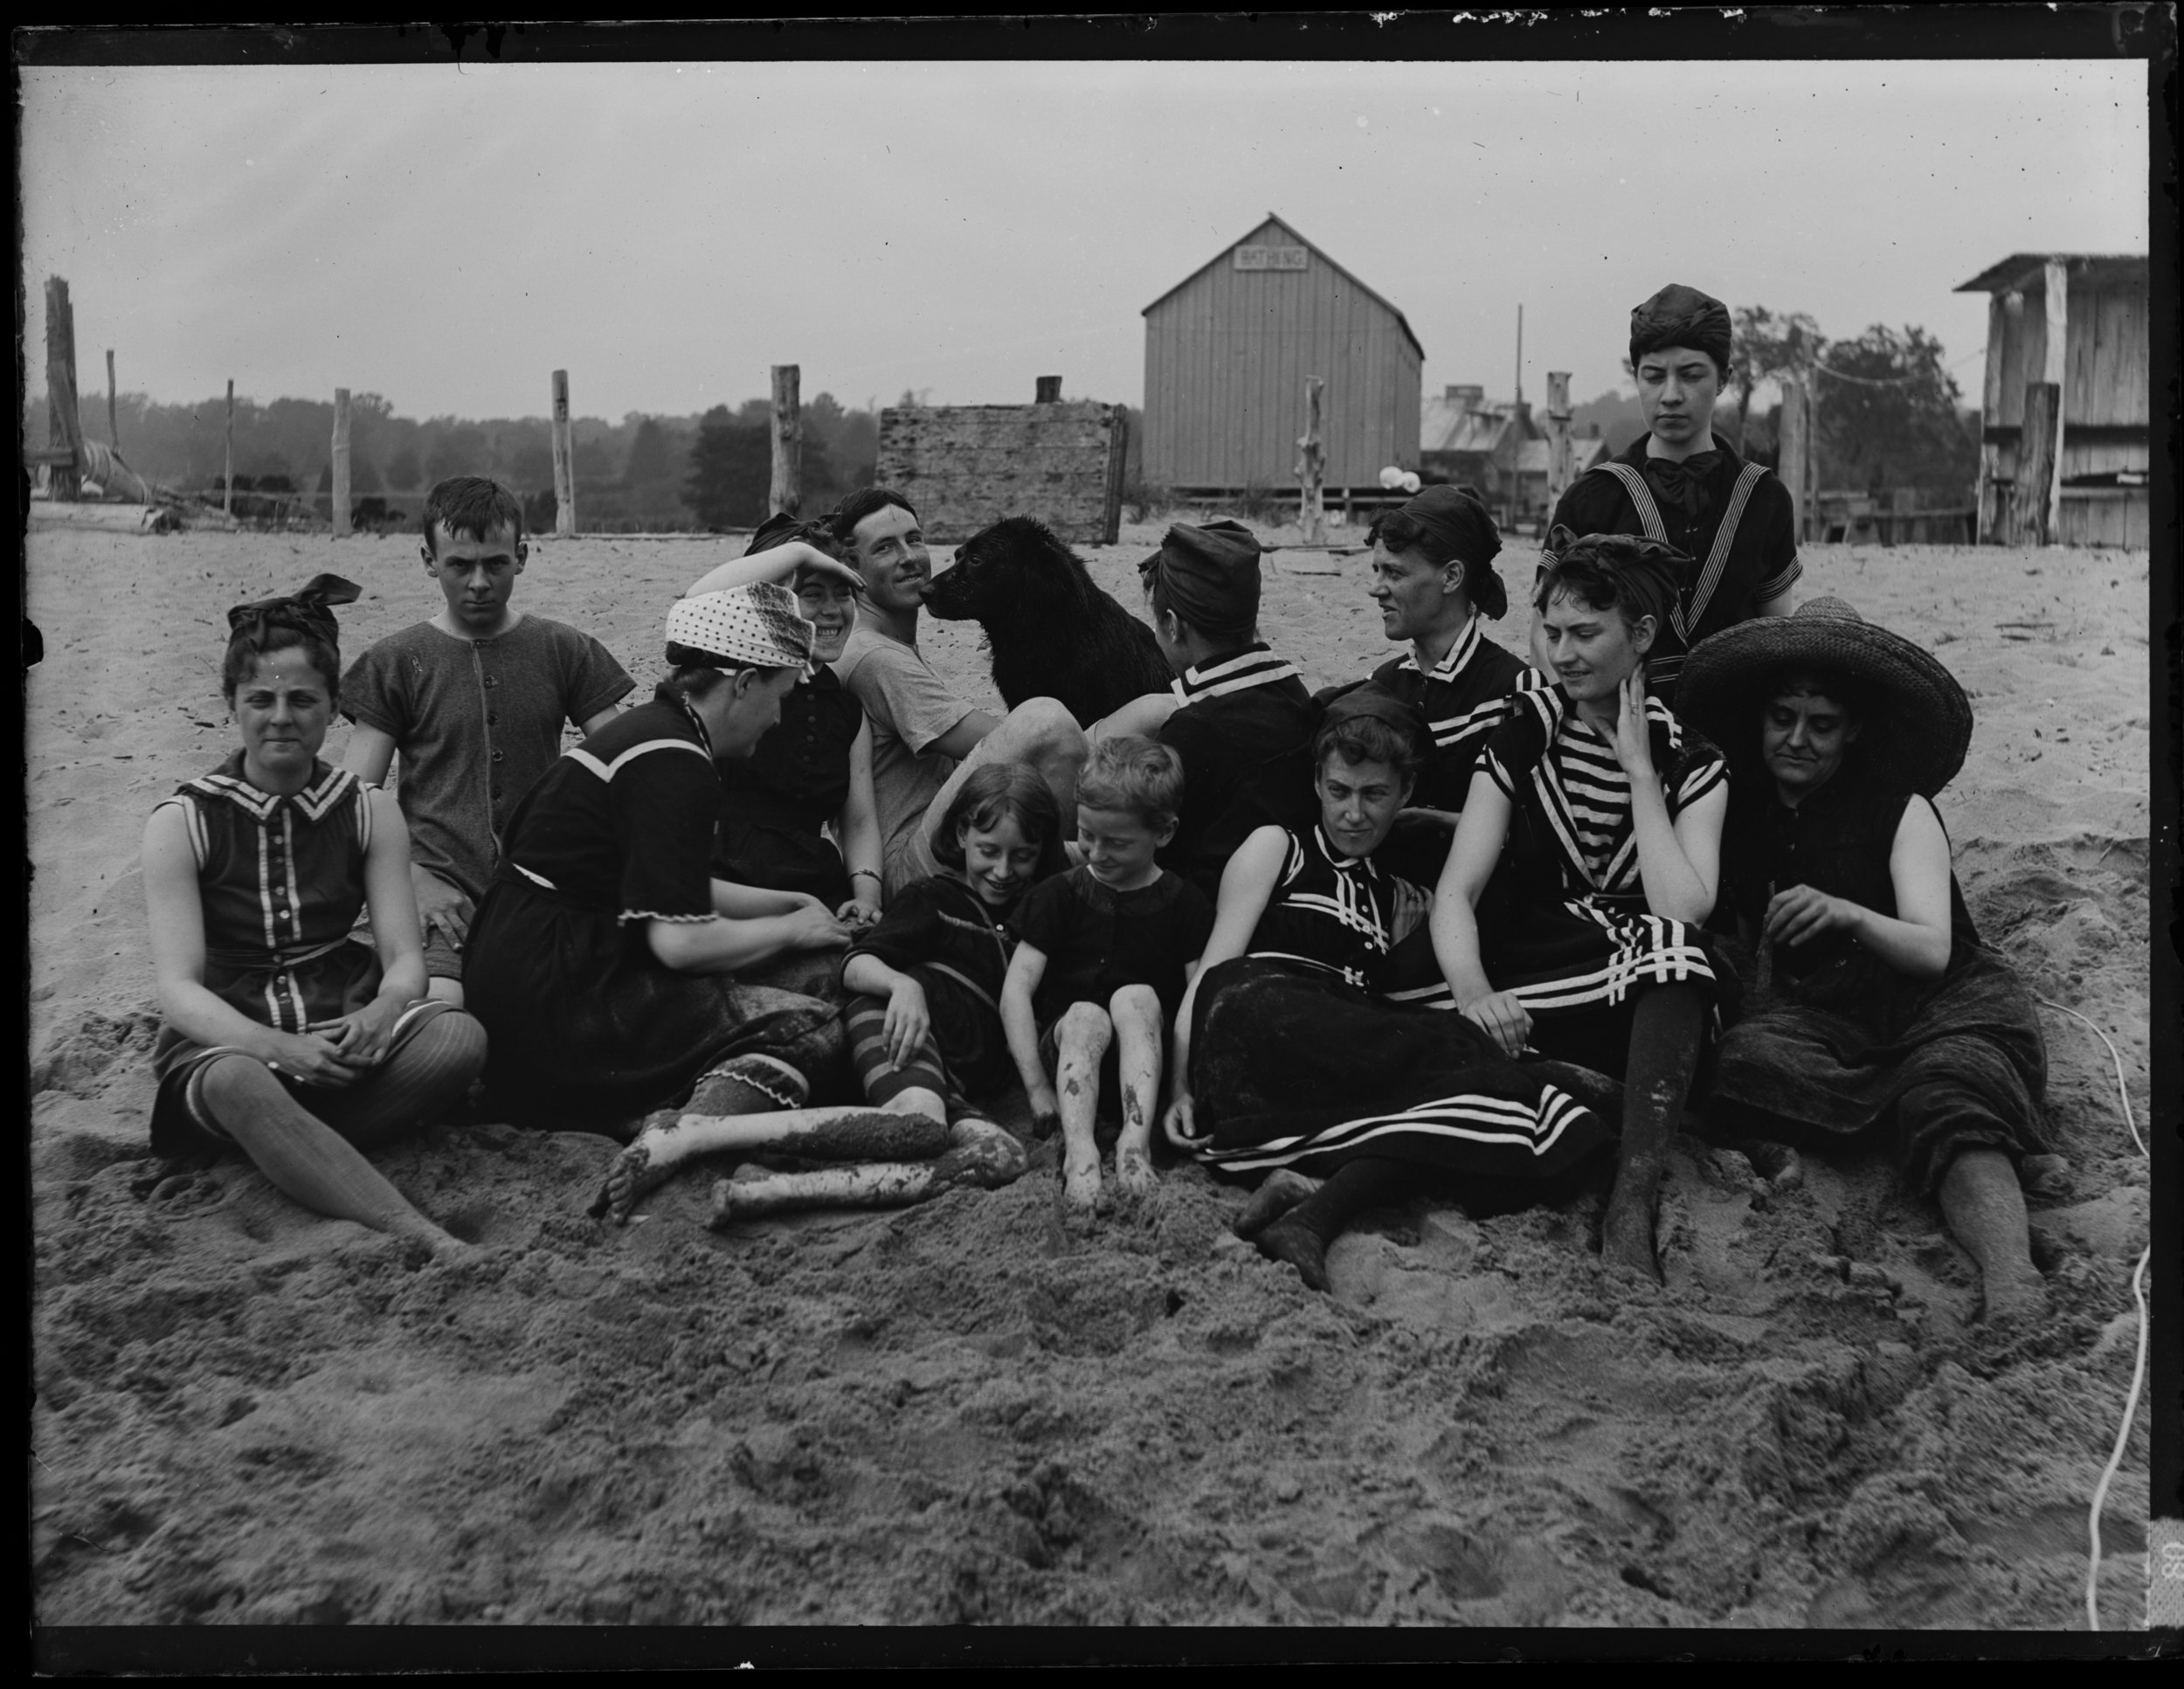 South Beach bathing party, Staten Island, September 15, 1886. Alice Austen is in the back row at right